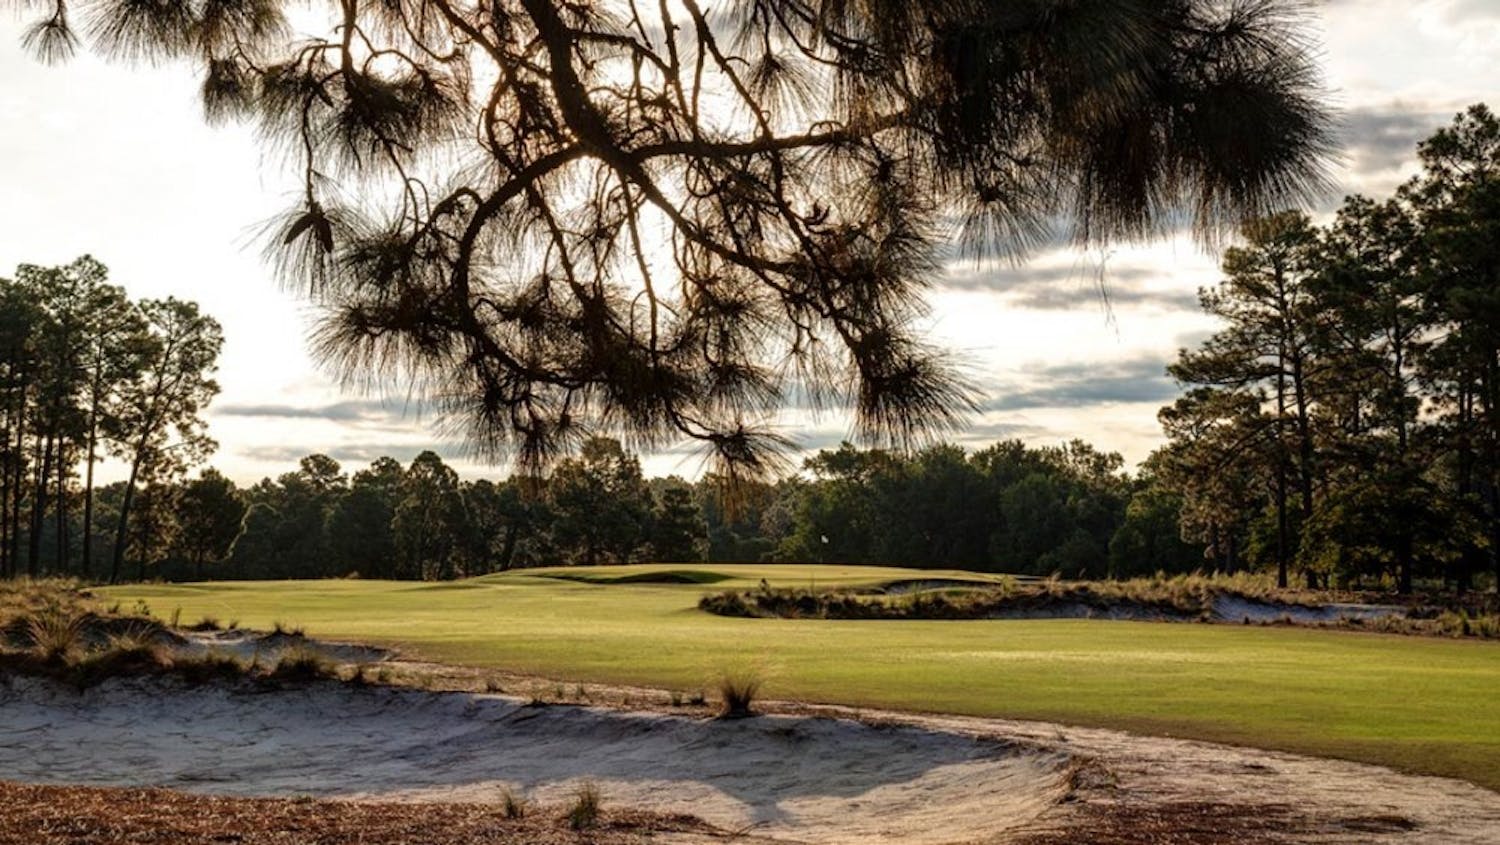 Pinehurst's famous, breath-taking&nbsp;golf course, Number Two, has been visited by President Obama.